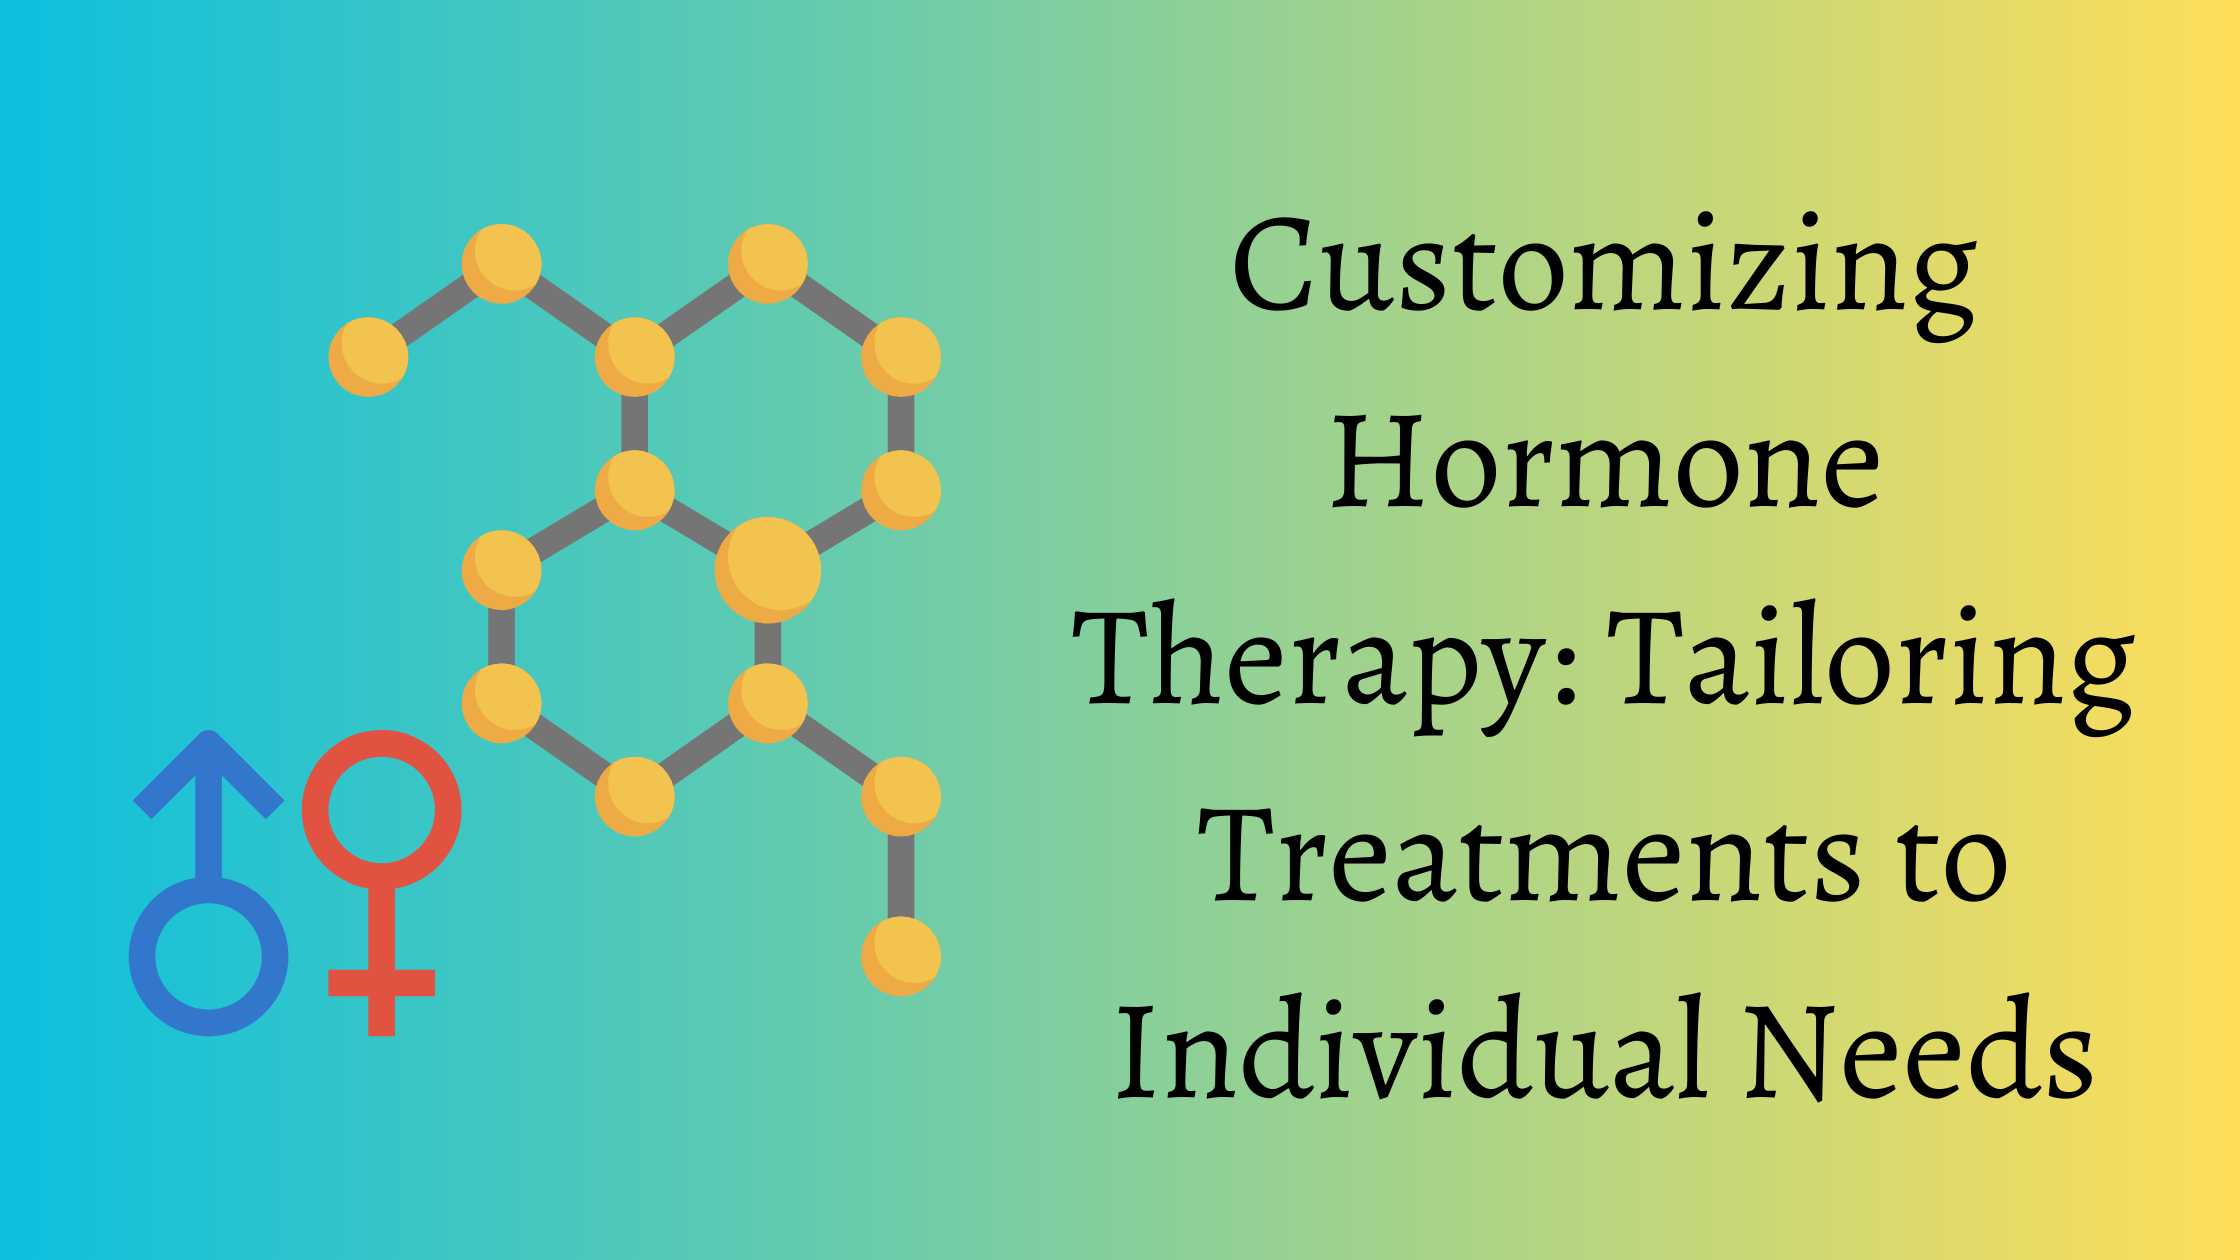 Customizing Hormone Therapy: Tailoring Treatments to Individual Needs